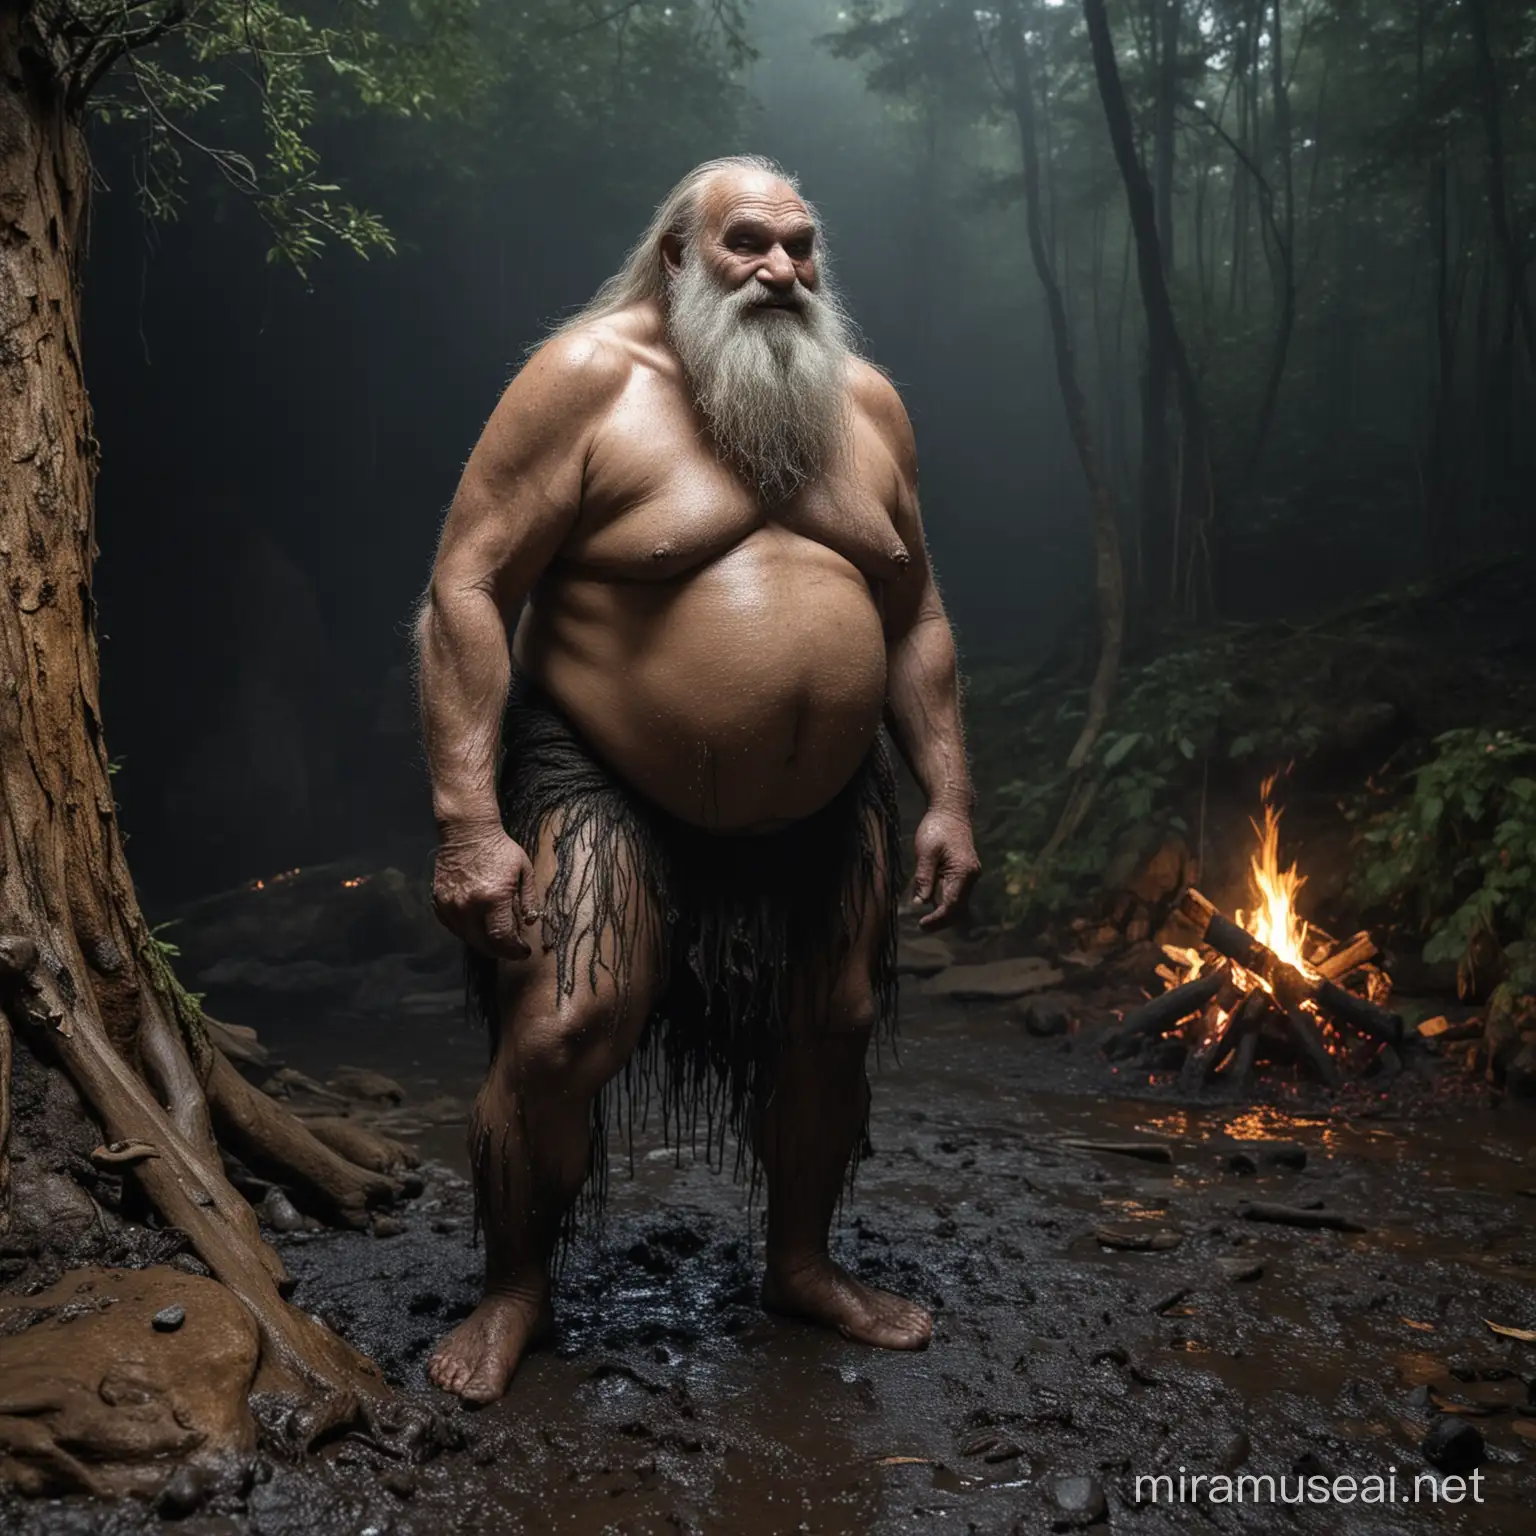 troll,forest cave,at midnight,large feet,loincloth,dumpy,chubby,primitive,hairy,long beard,old age,bonfire,rainy,wet dirty black mud all over the body,black people